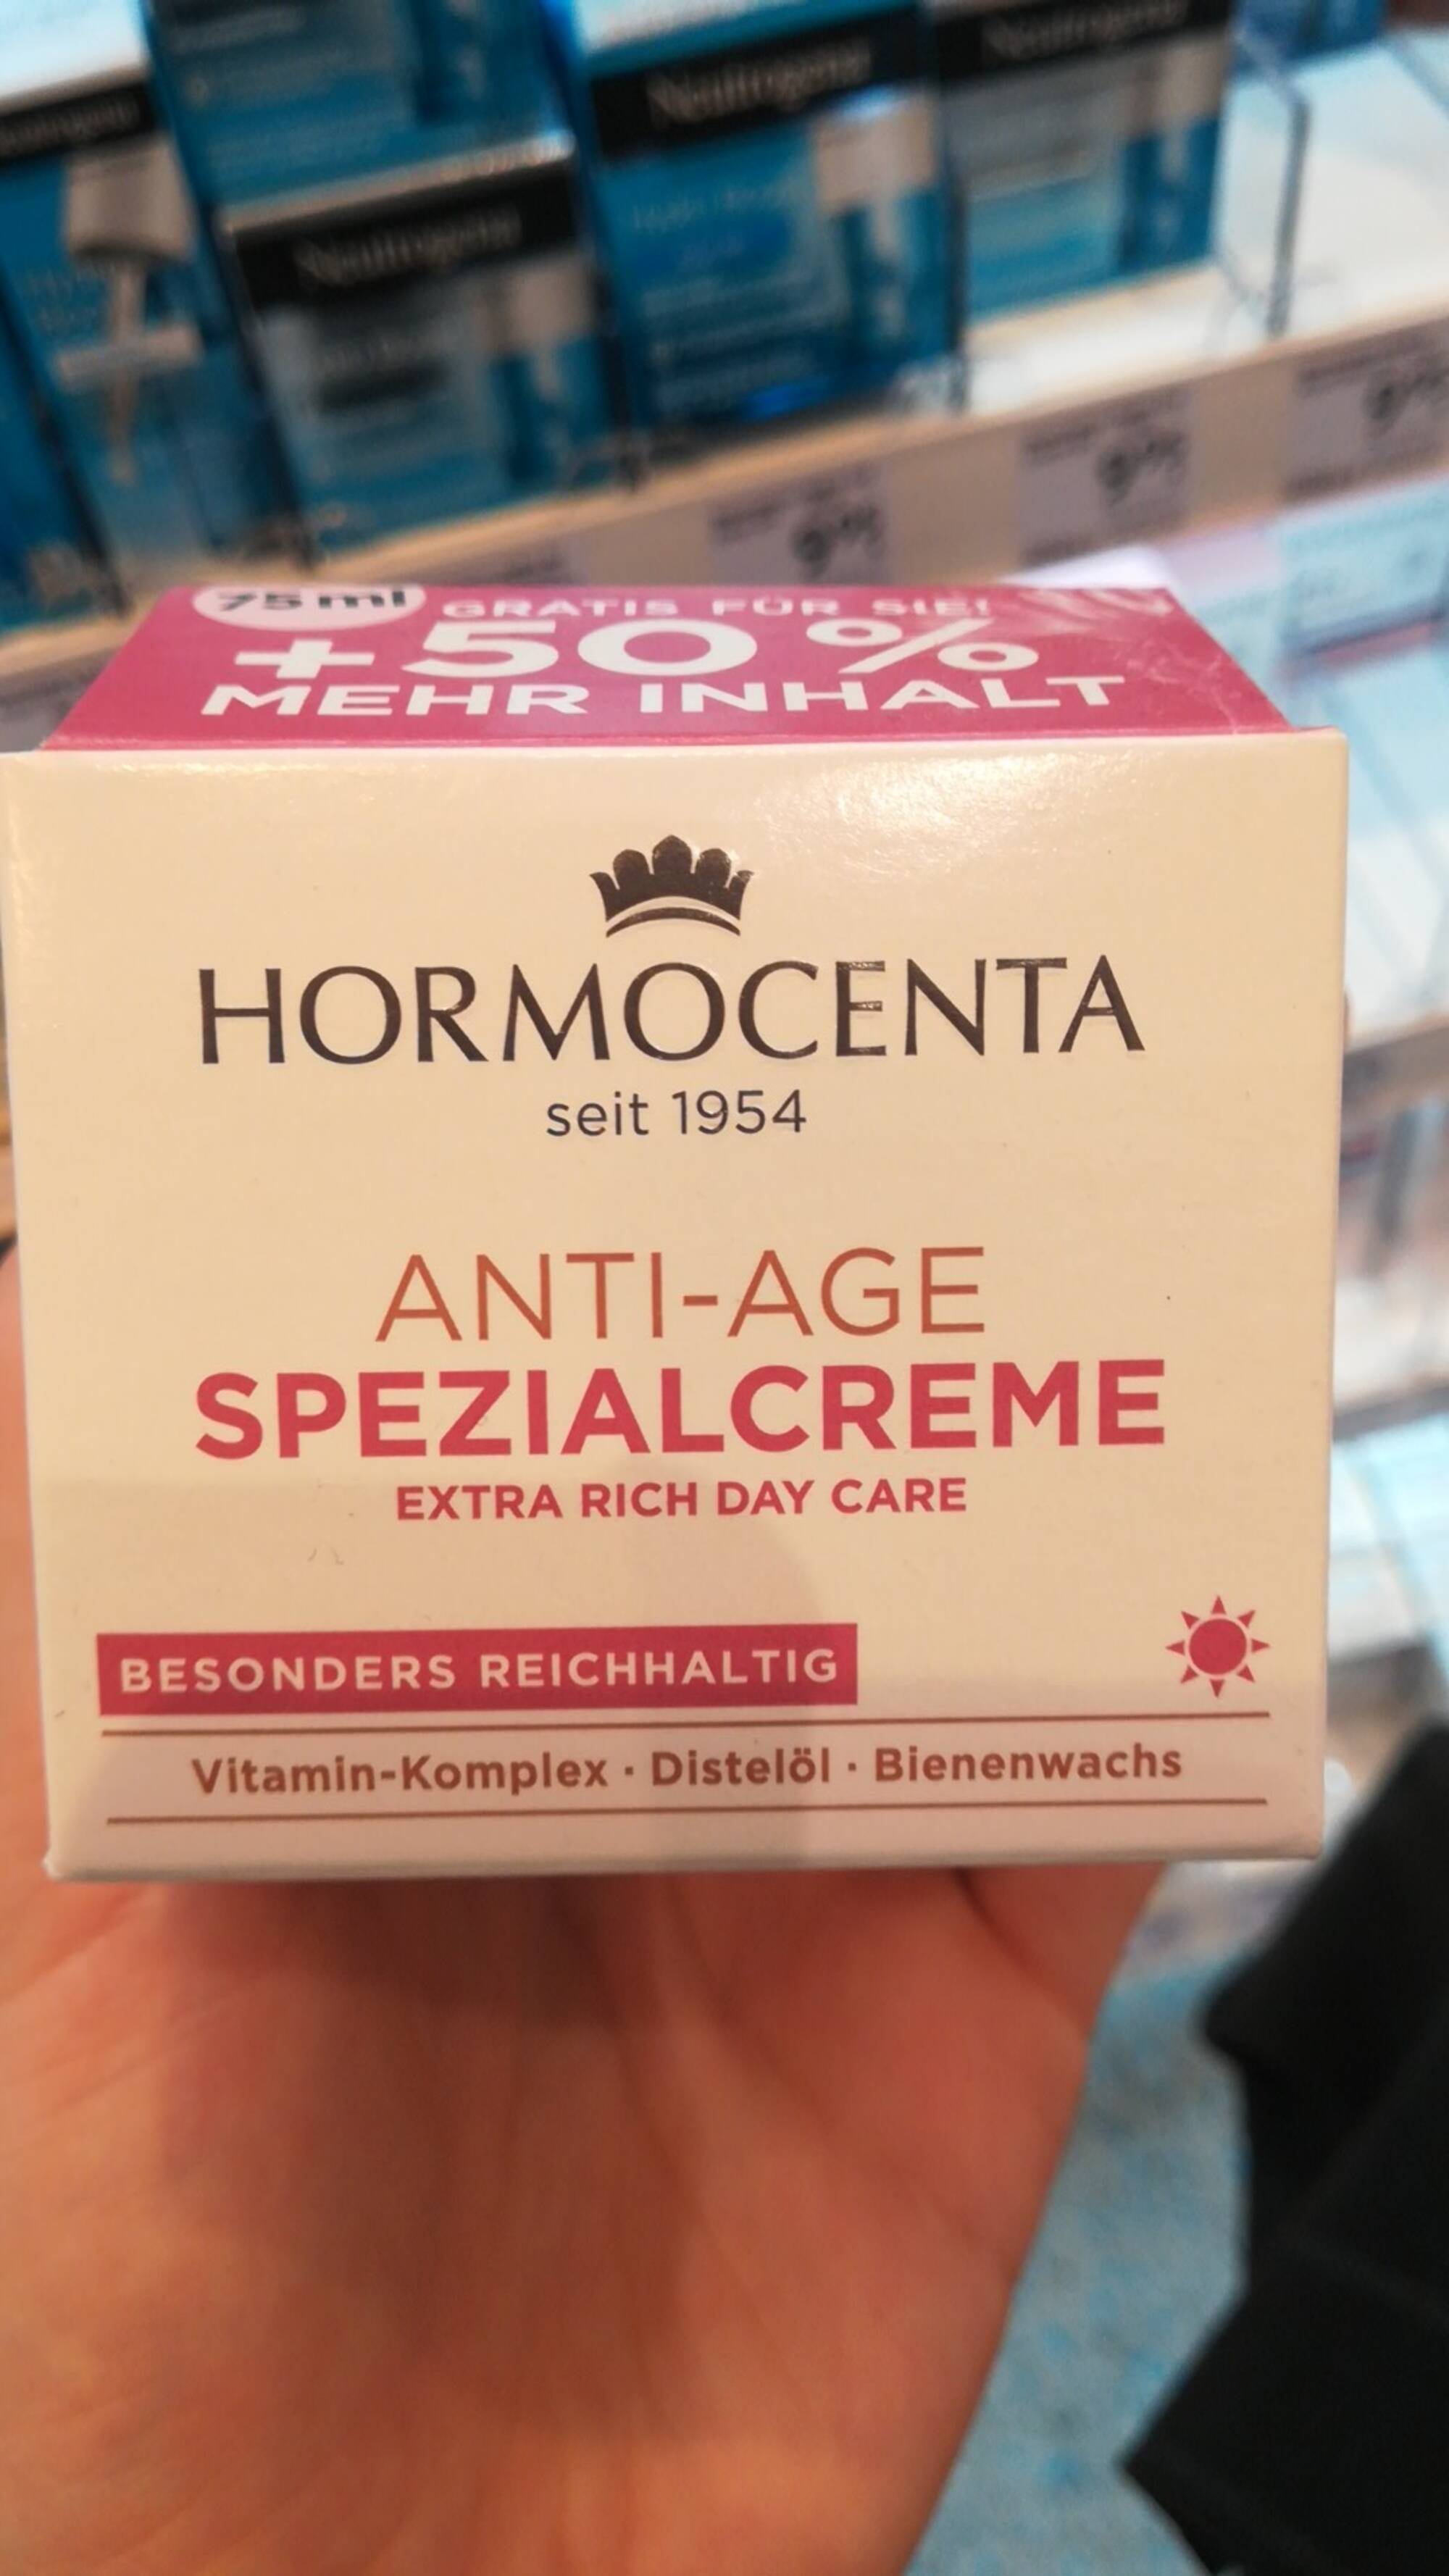 HORMOCENTA - Anti-age - Extra rich day care